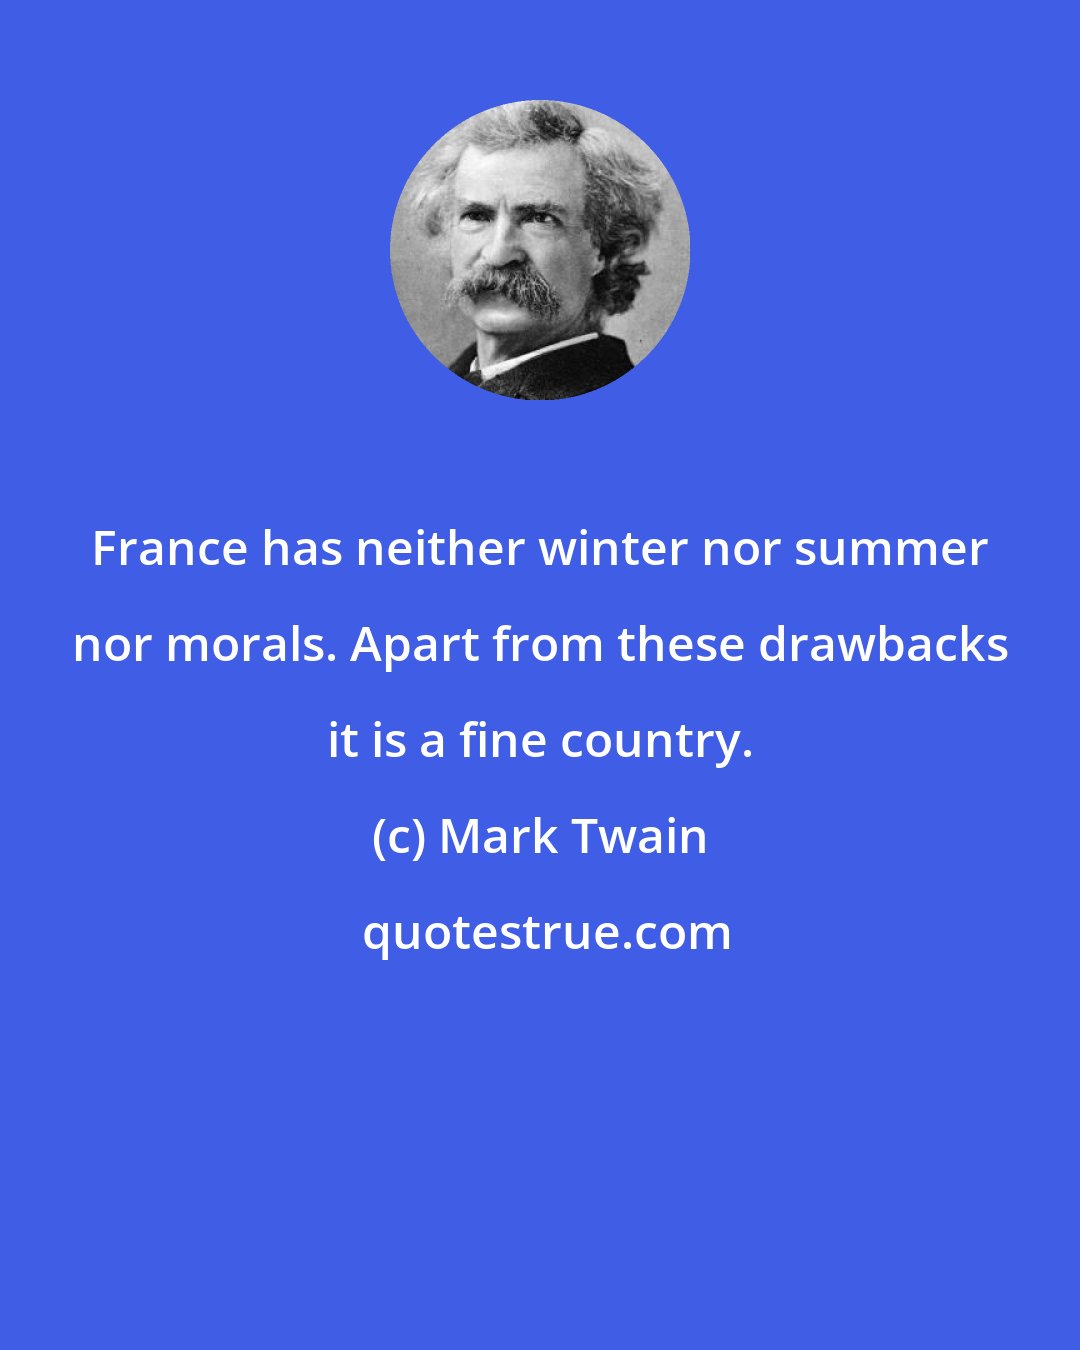 Mark Twain: France has neither winter nor summer nor morals. Apart from these drawbacks it is a fine country.